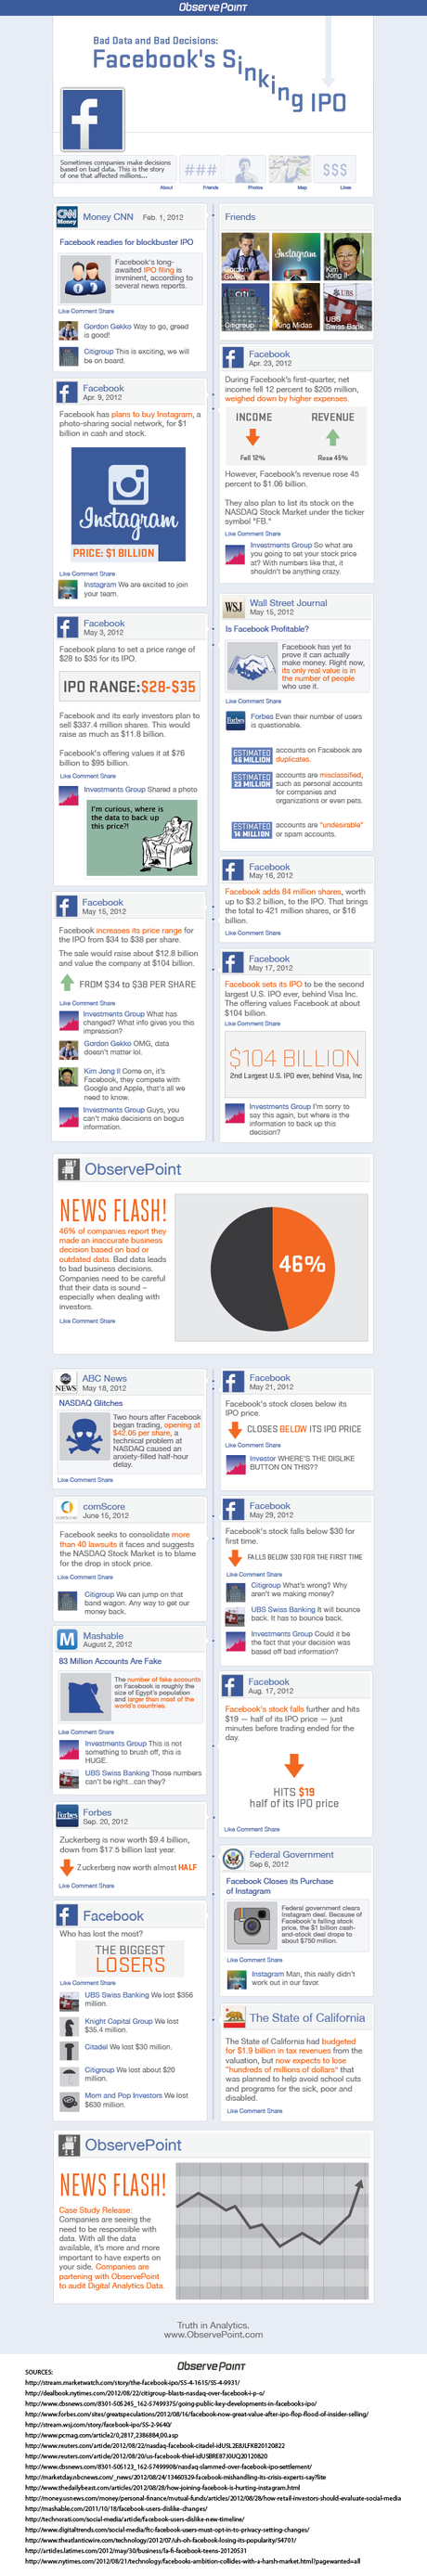 Infographic on Facebook IPO